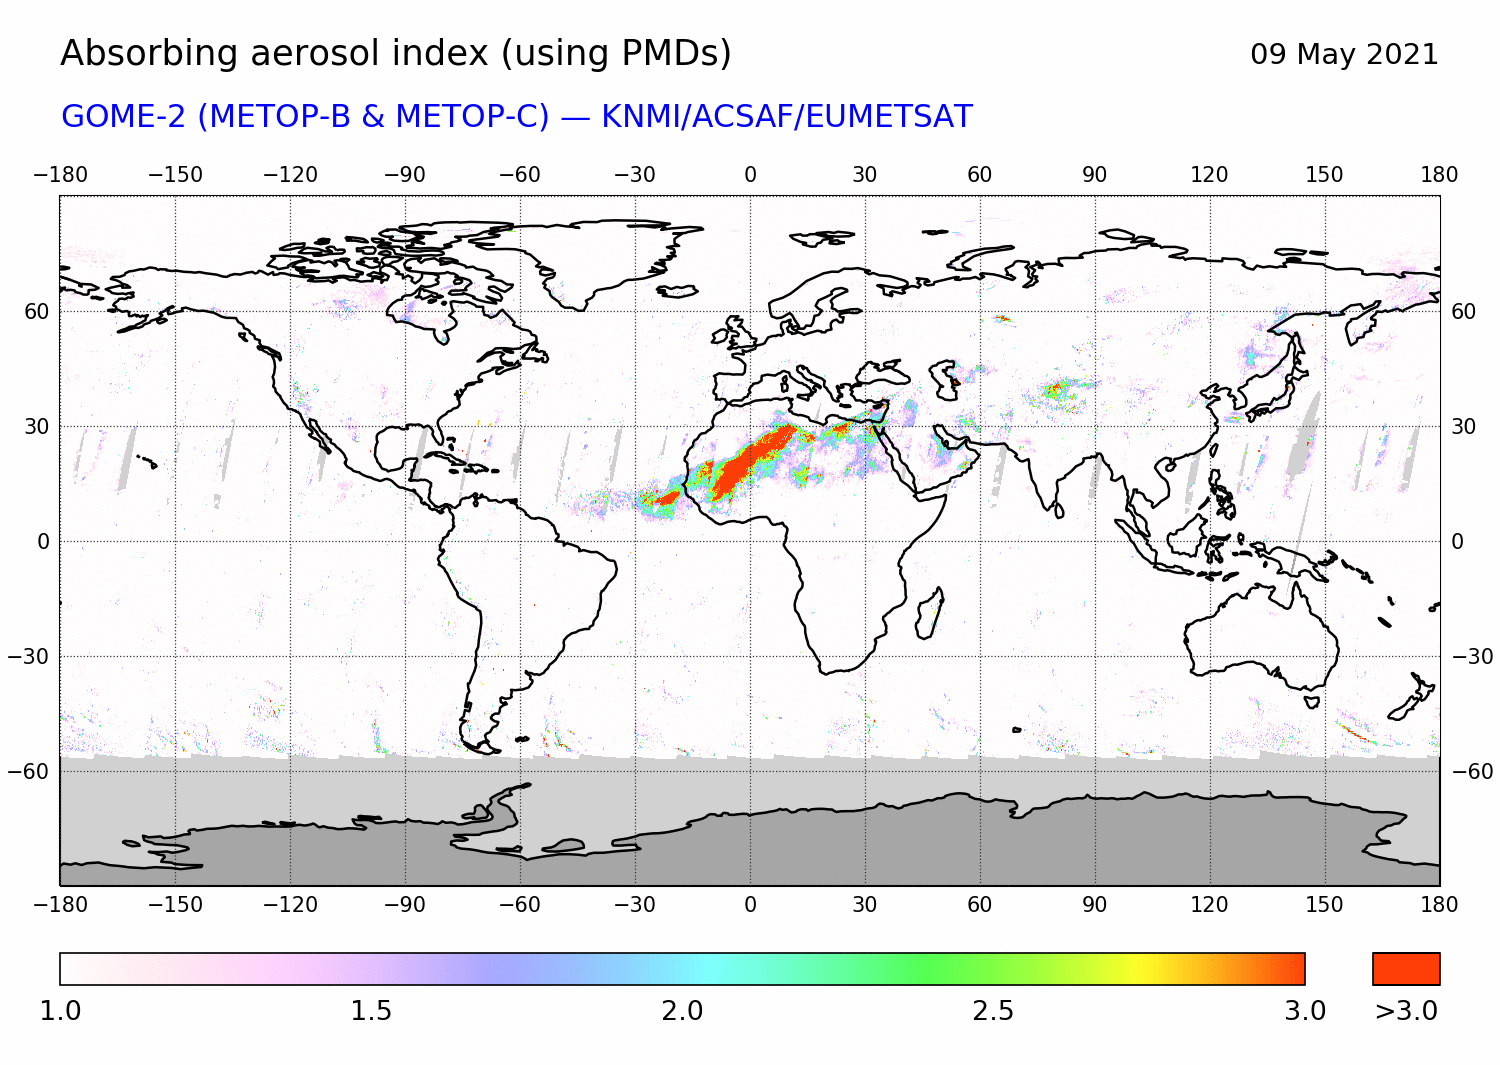 GOME-2 - Absorbing aerosol index of 09 May 2021